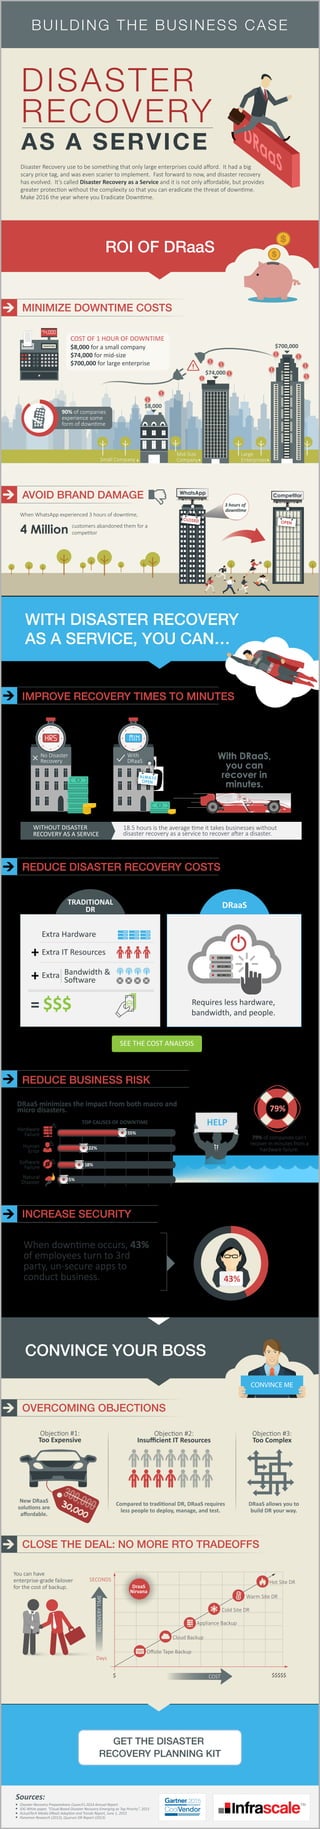 HELP
MINIMIZE DOWNTIME COSTS
AVOID BRAND DAMAGE
Disaster Recovery use to be something that only large enterprises could aﬀord. It had a big
scary price tag, and was even scarier to implement. Fast forward to now, and disaster recovery
has evolved. It’s called Disaster Recovery as a Service and it is not only aﬀordable, but provides
greater protection without the complexity so that you can eradicate the threat of downtime.
Make 2016 the year where you Eradicate Downtime.
18.5 hours is the average time it takes businesses without
disaster recovery as a service to recover after a disaster.
REDUCE DISASTER RECOVERY COSTS
BUILDING THE BUSINESS CASE
DISASTER
RECOVERY
AS A SERVICE
When WhatsApp experienced 3 hours of downtime,
customers abandoned them for a
competitor
With DRaaS,
you can
recover in
minutes.
WITHOUT DISASTER
RECOVERY AS A SERVICE
REDUCE BUSINESS RISK
INCREASE SECURITY
OVERCOMING OBJECTIONS
CLOSE THE DEAL: NO MORE RTO TRADEOFFS
Hardware
Failure
DRaaS minimizes the impact from both macro and
micro disasters.
SEE THE COST ANALYSIS
TOP CAUSES OF DOWNTIME
79% of companies can’t
recover in minutes from a
hardware failure.
Human
Error
Software
Failure
Natural
Disaster
Objection #1:
Too Expensive
Objection #2:
Insuﬃcient IT Resources
You can have
enterprise-grade failover
for the cost of backup.
Objection #3:
Too Complex
WhatsApp Competitor
WITH DISASTER RECOVERY
AS A SERVICE, YOU CAN…
55%
22%
18%
5%
When downtime occurs, 43%
of employees turn to 3rd
party, un-secure apps to
conduct business.
300,00030,000
Oﬀsite Tape Backup
Cloud Backup
Appliance Backup
Cold Site DR
Warm Site DR
Hot Site DR
Days
SECONDS
RECOVERYTIME
$ COST $$$$$
$700,000
$
$
$
$
$
$
$
$
$
$
$
$8,000
$74,000
Small Company
Mid-Size
Company
Large
Enterprises
90% of companies
experience some
form of downtime
3 hours of
downtime
hrs
No Disaster
Recovery
min
With
DRaaS
79%
DraaS
Nirvana
$8,000 for a small company
$74,000 for mid-size
$700,000 for large enterprise
COST OF 1 HOUR OF DOWNTIME
74,000
DOWNTIME
CLOSED OPEN
43%
New DRaaS
solutions are
aﬀordable.
Compared to traditional DR, DRaaS requires
less people to deploy, manage, and test.
DRaaS allows you to
build DR your way.
DRaaSTRADITIONAL
DR
Extra IT Resources
Extra Hardware
Bandwidth &
Software
Extra
$$$ Requires less hardware,
bandwidth, and people.
DRAAS
ALWAYS
OPEN
4 Million
IMPROVE RECOVERY TIMES TO MINUTES
GET THE DISASTER
RECOVERY PLANNING KIT
Disaster Recovery Preparedness Council’s 2014 Annual Report
IDG White paper, “Cloud-Based Disaster Recovery Emerging as Top Priority”, 2015
ActualTech Media DRaaS Adoption and Trends Report, June 1, 2015
Ponemon Research (2013), Quorum DR Report (2013)
Sources:
ROI OF DRaaS
2015
CONVINCE YOUR BOSS
CONVINCE ME
 